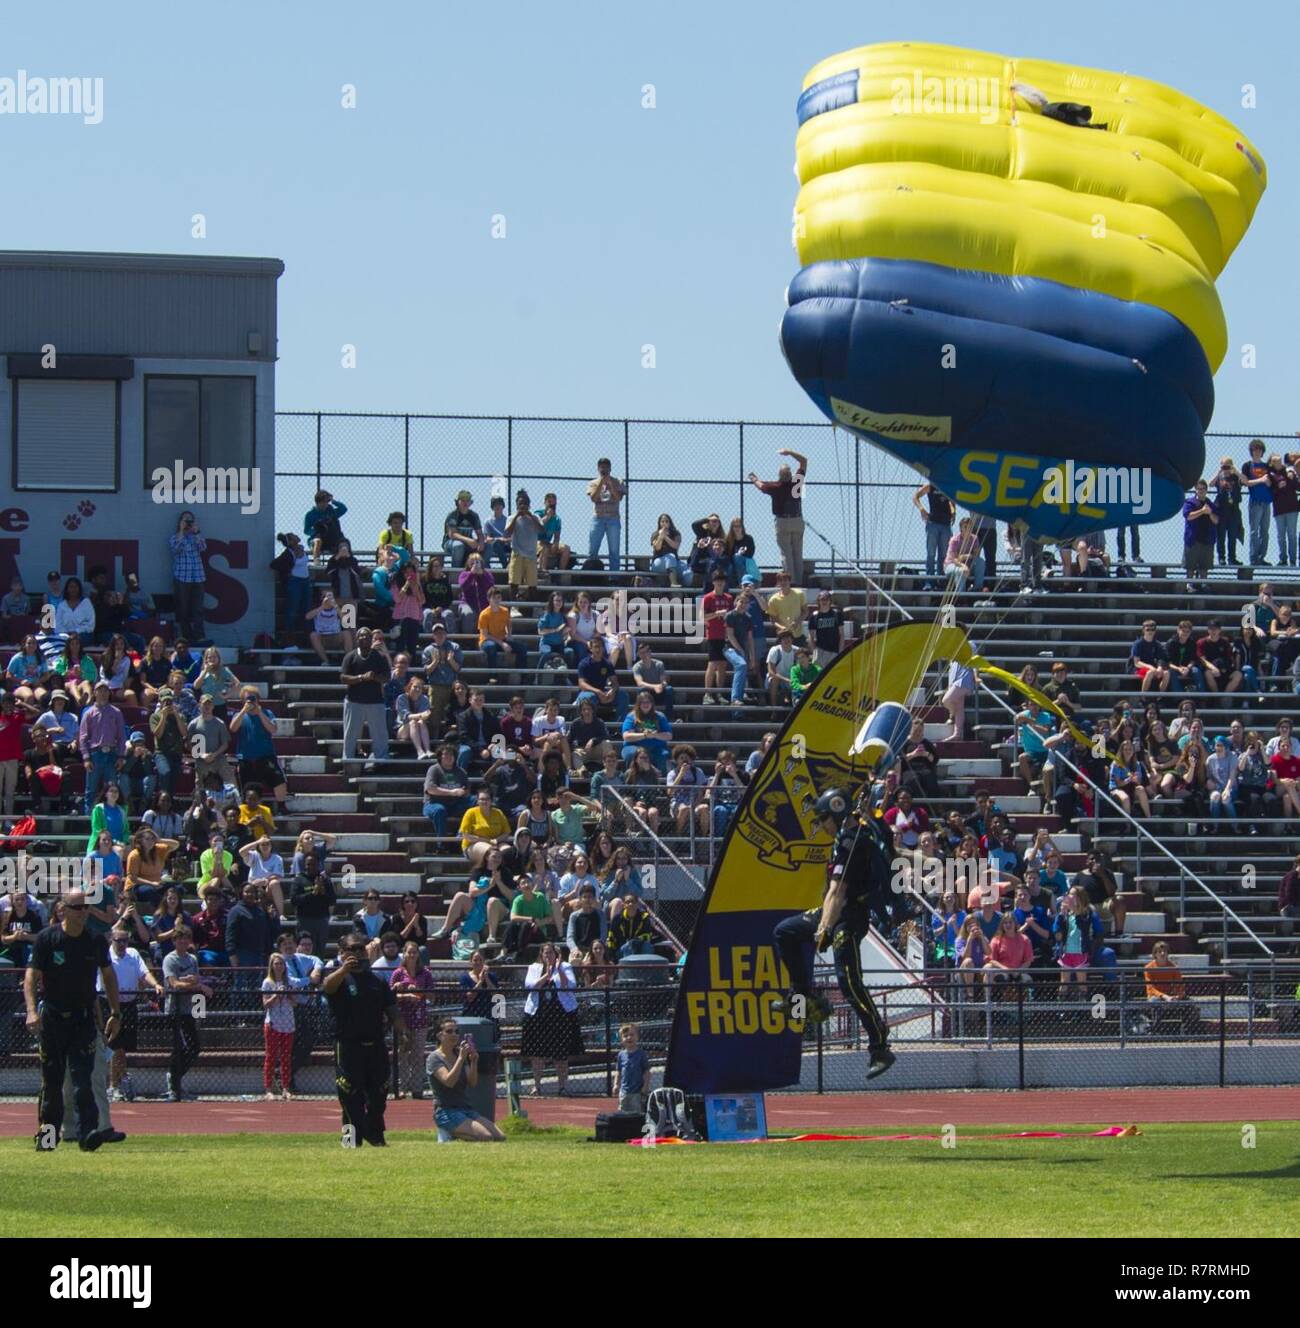 LONG BEACH, Miss. (April 03, 2017) Special Operator 1st Class Timmy Holland, member of the U.S. Navy Parachute Team, the Leap Frogs, lands on a football field during a skydiving demonstration at Long Beach High School that was part of Navy Week Gulfport/Biloxi. The Navy Week program serves as the Navy's principal outreach effort in areas of the country without a significant Navy presence. Stock Photo